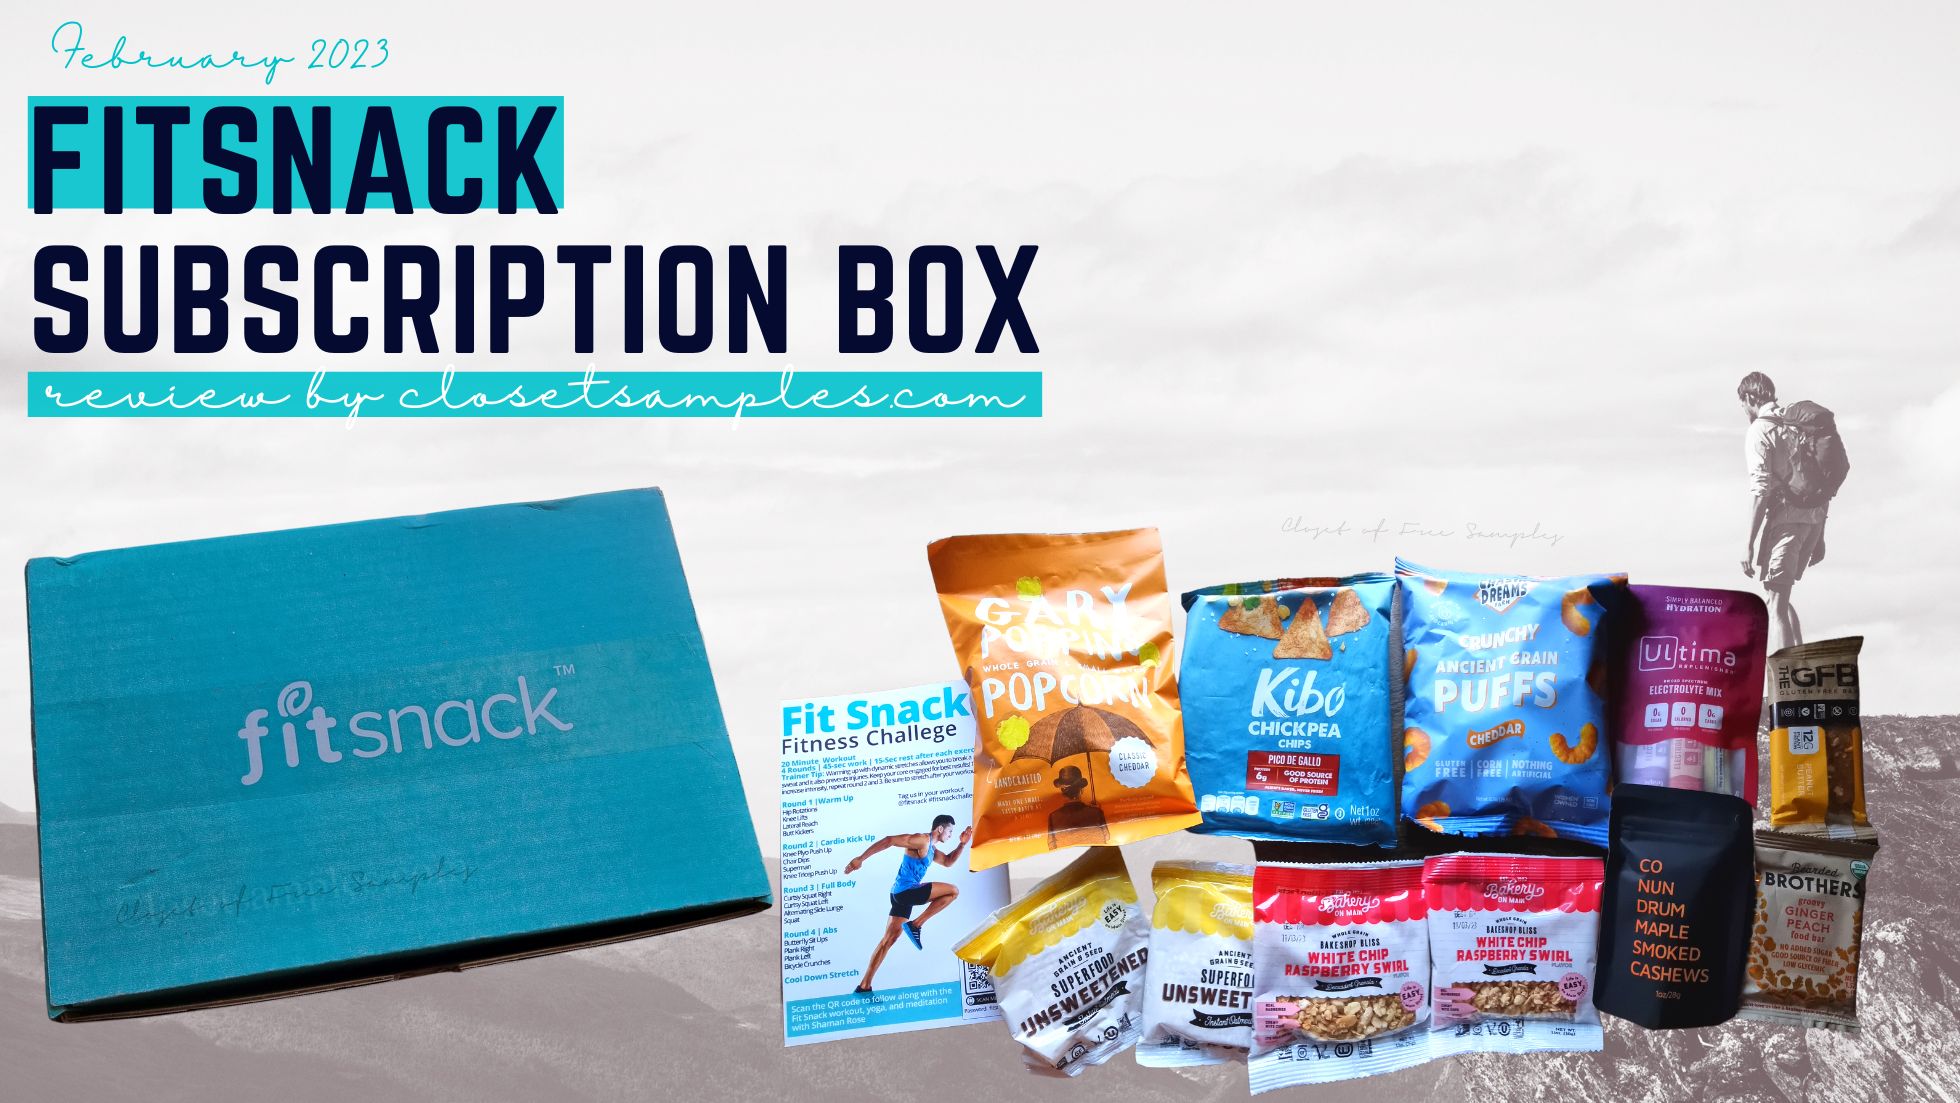 FitSnack Subscription Box February 2023 Review closetsamples